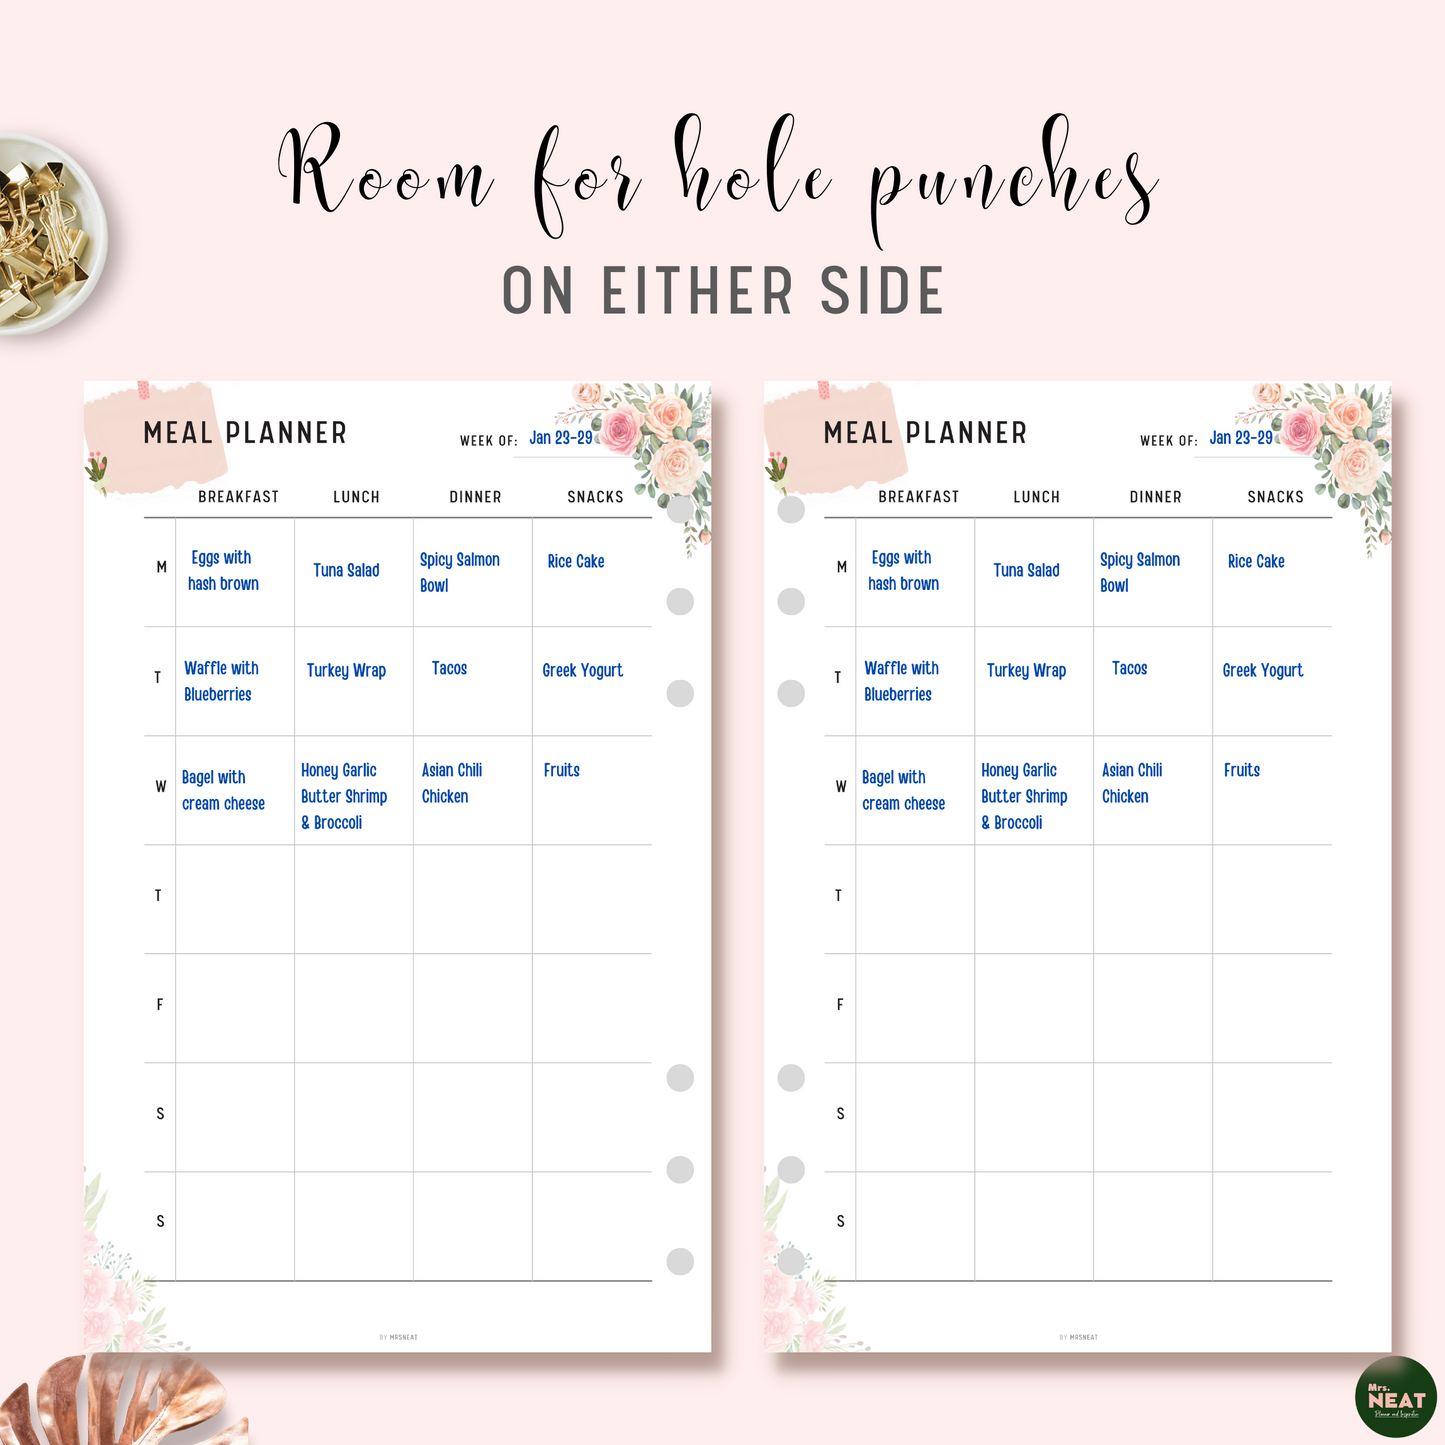 Floral Weekly Meal Planner Printable with room for hole punches on either side